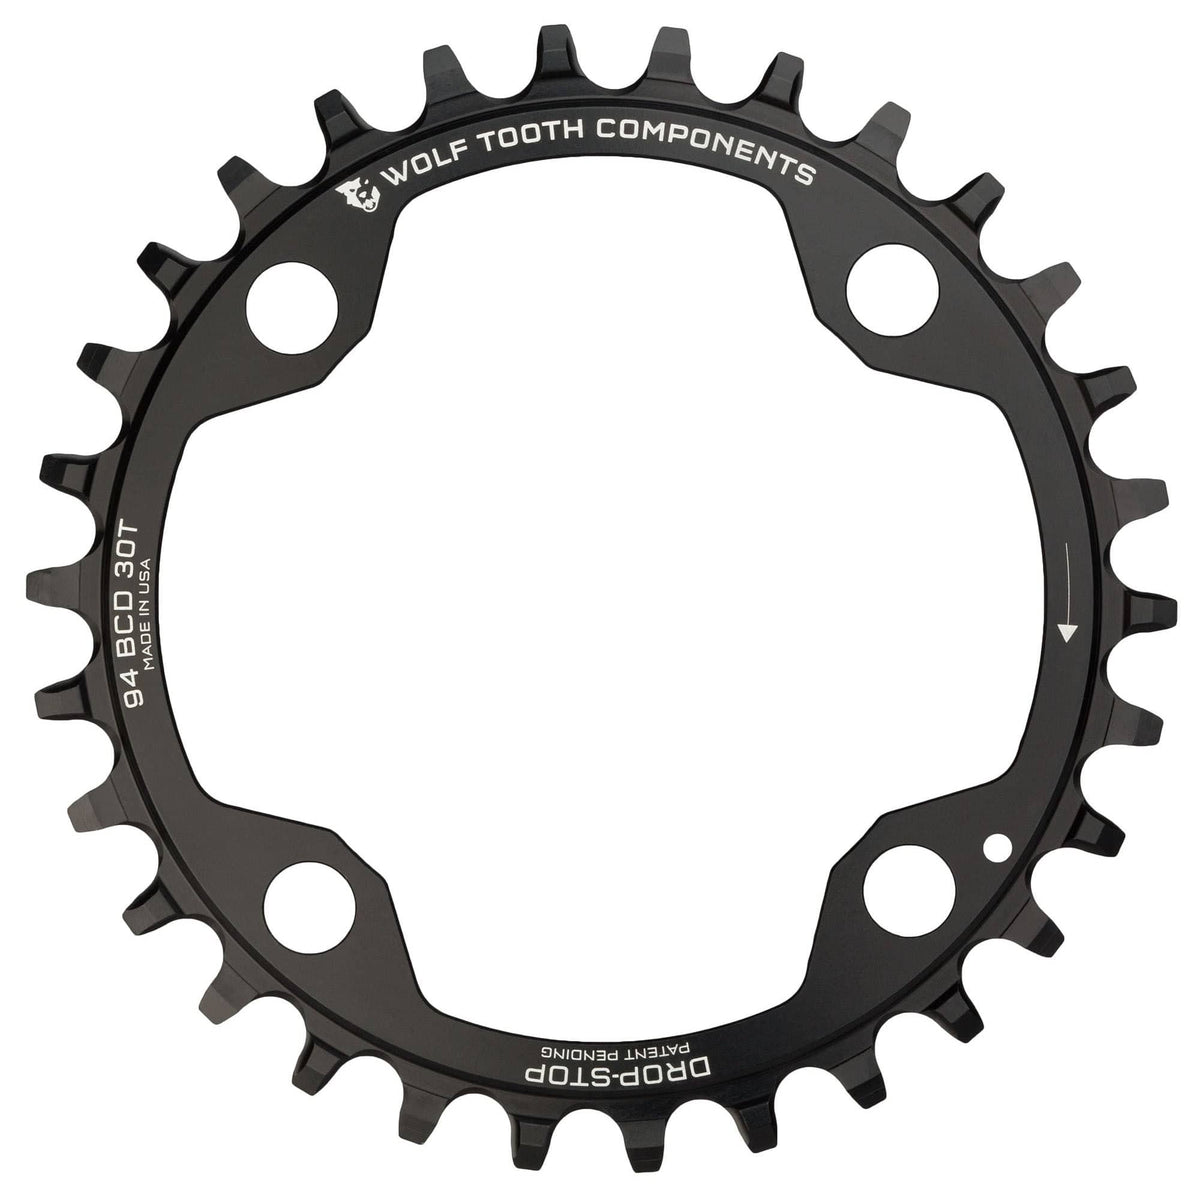 www.wolftoothcomponents.com